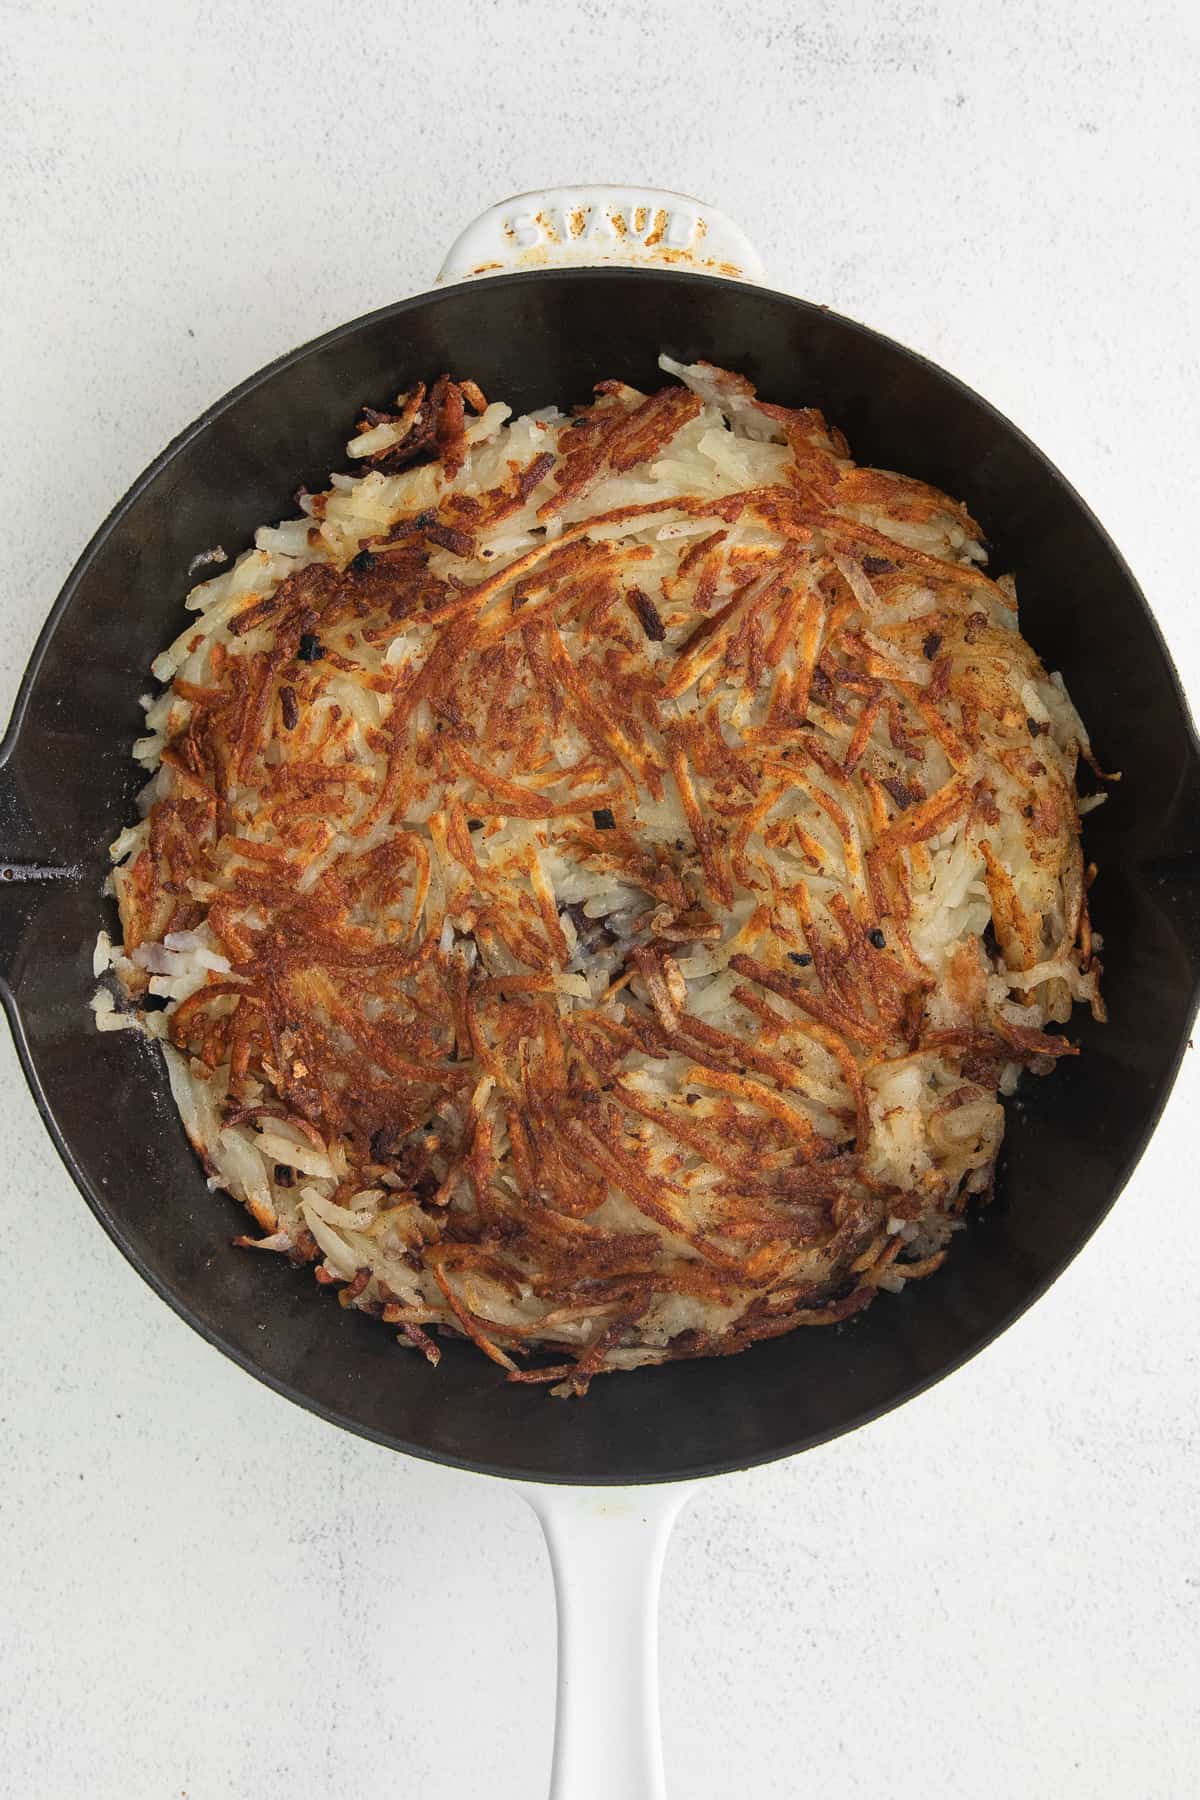 Hash browns in a cast iron skillet.